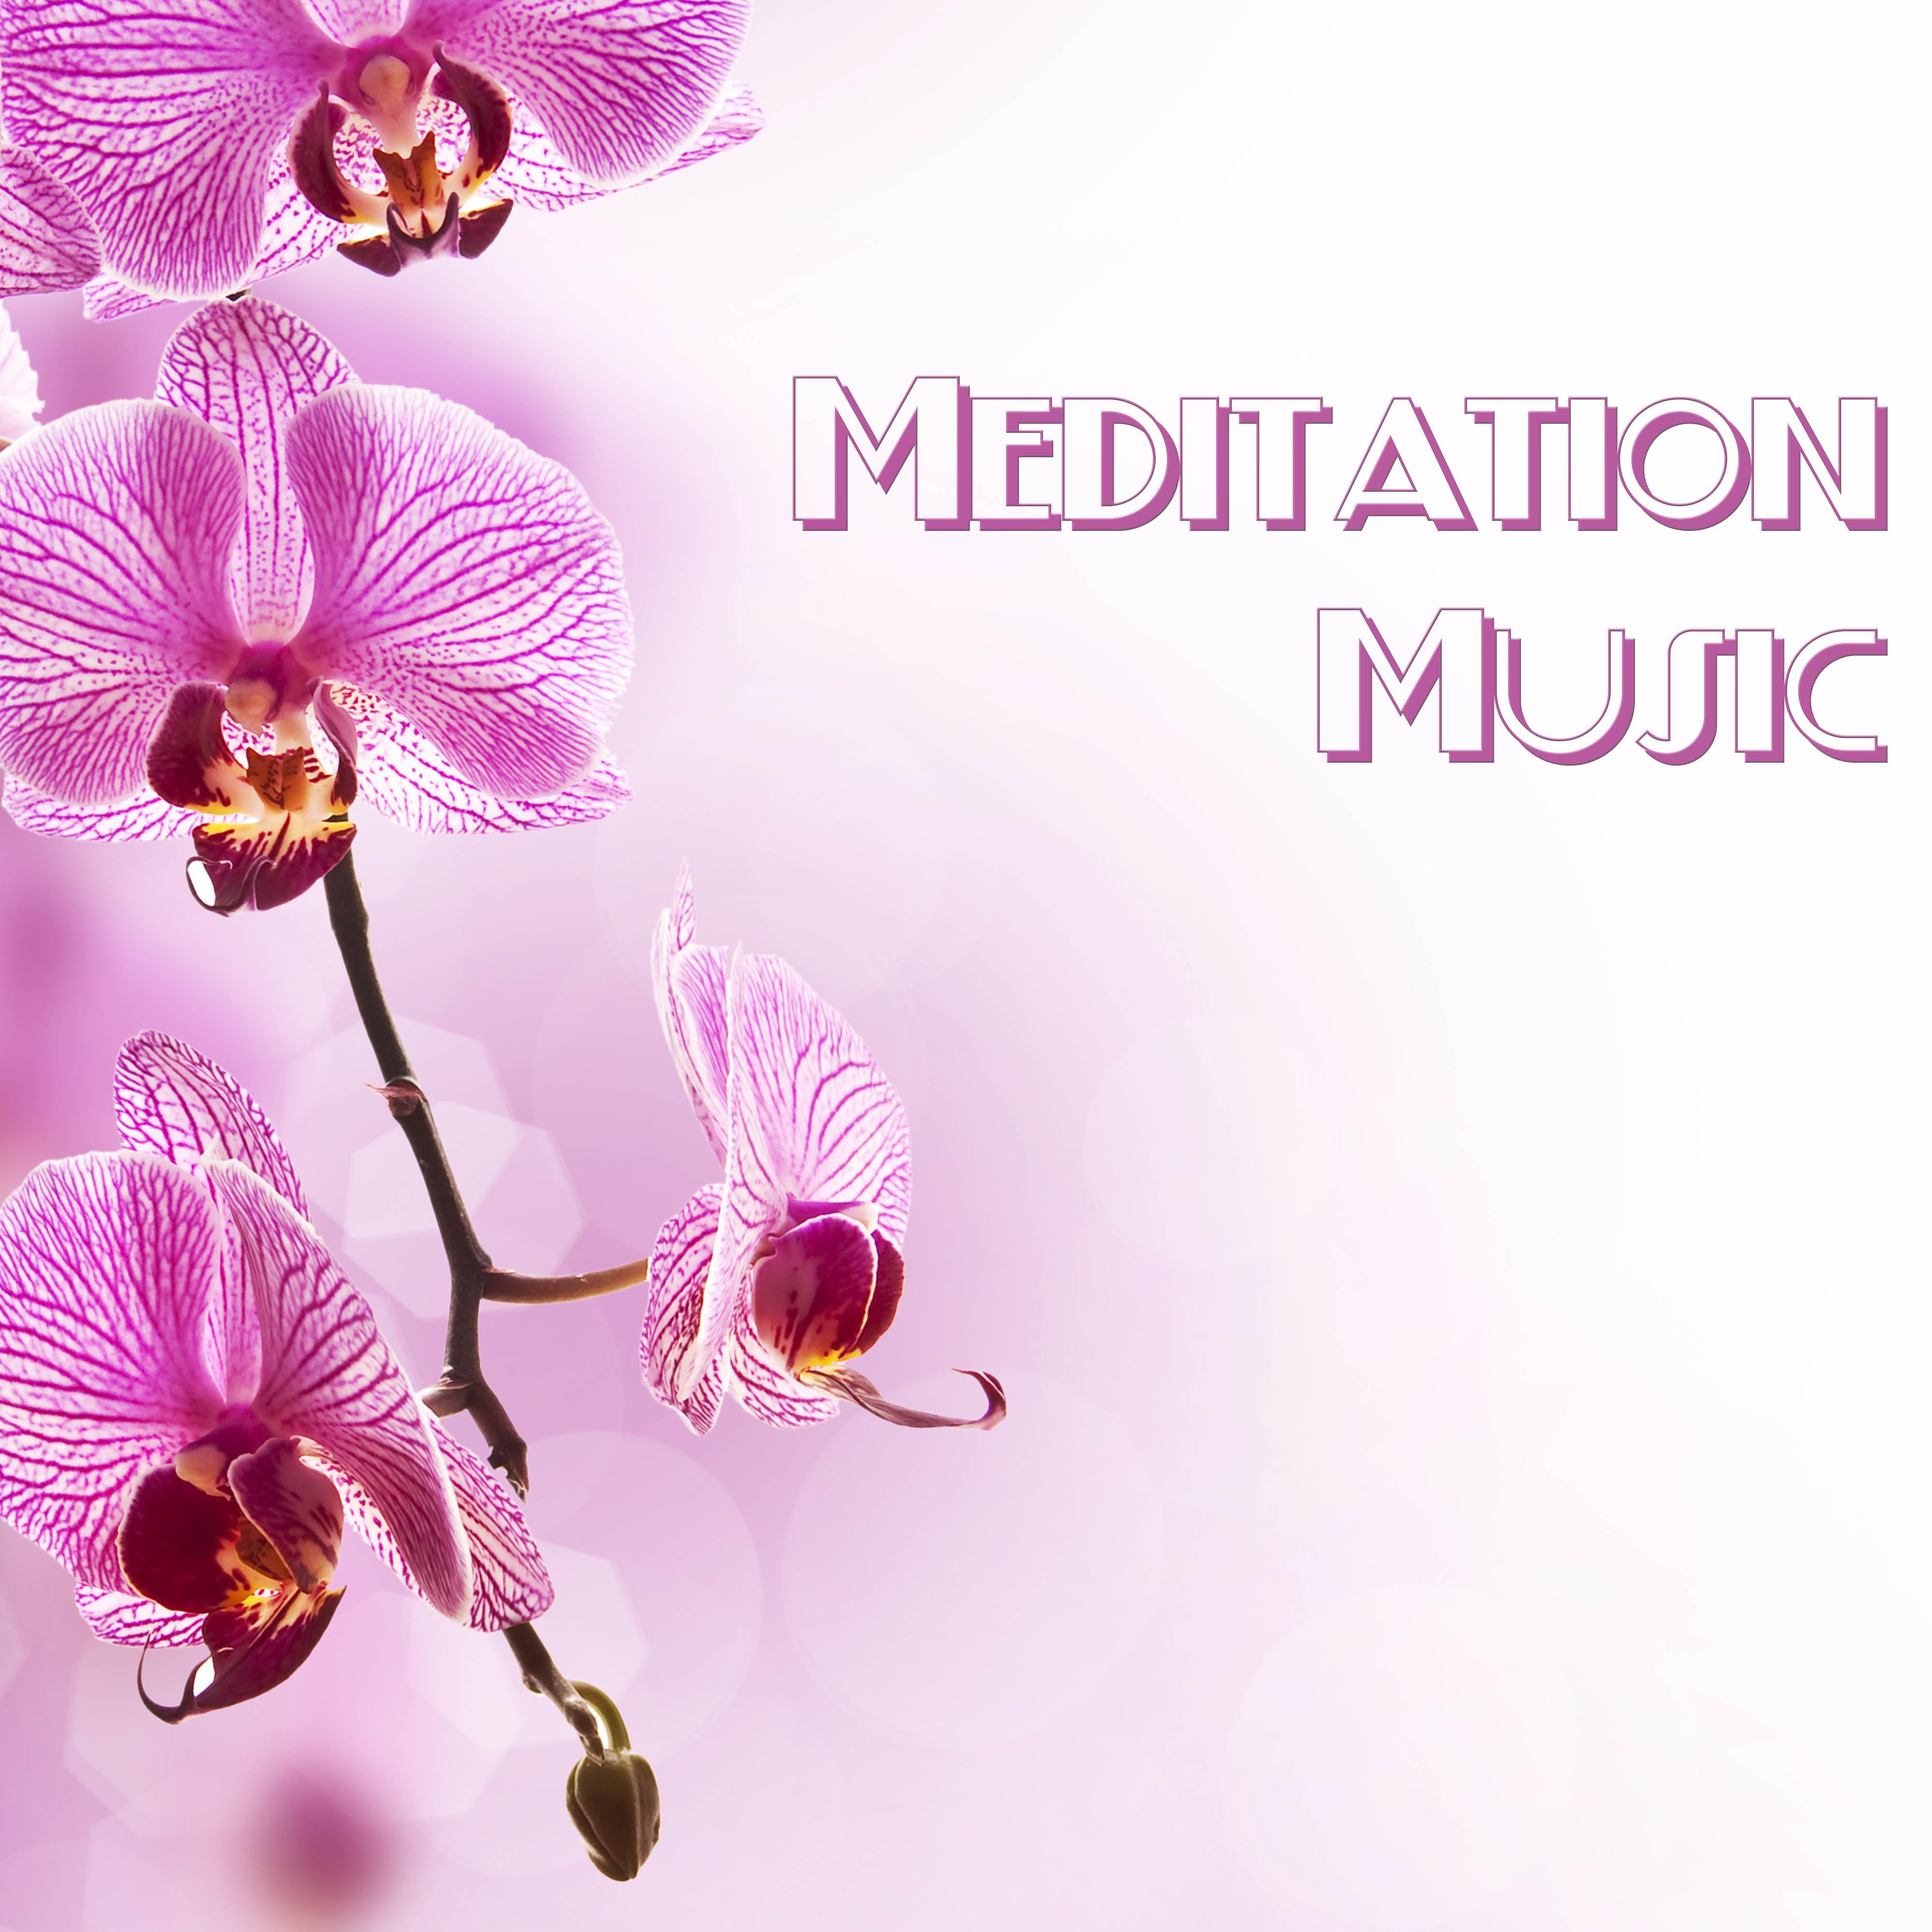 Meditation Music to Relieve Stress